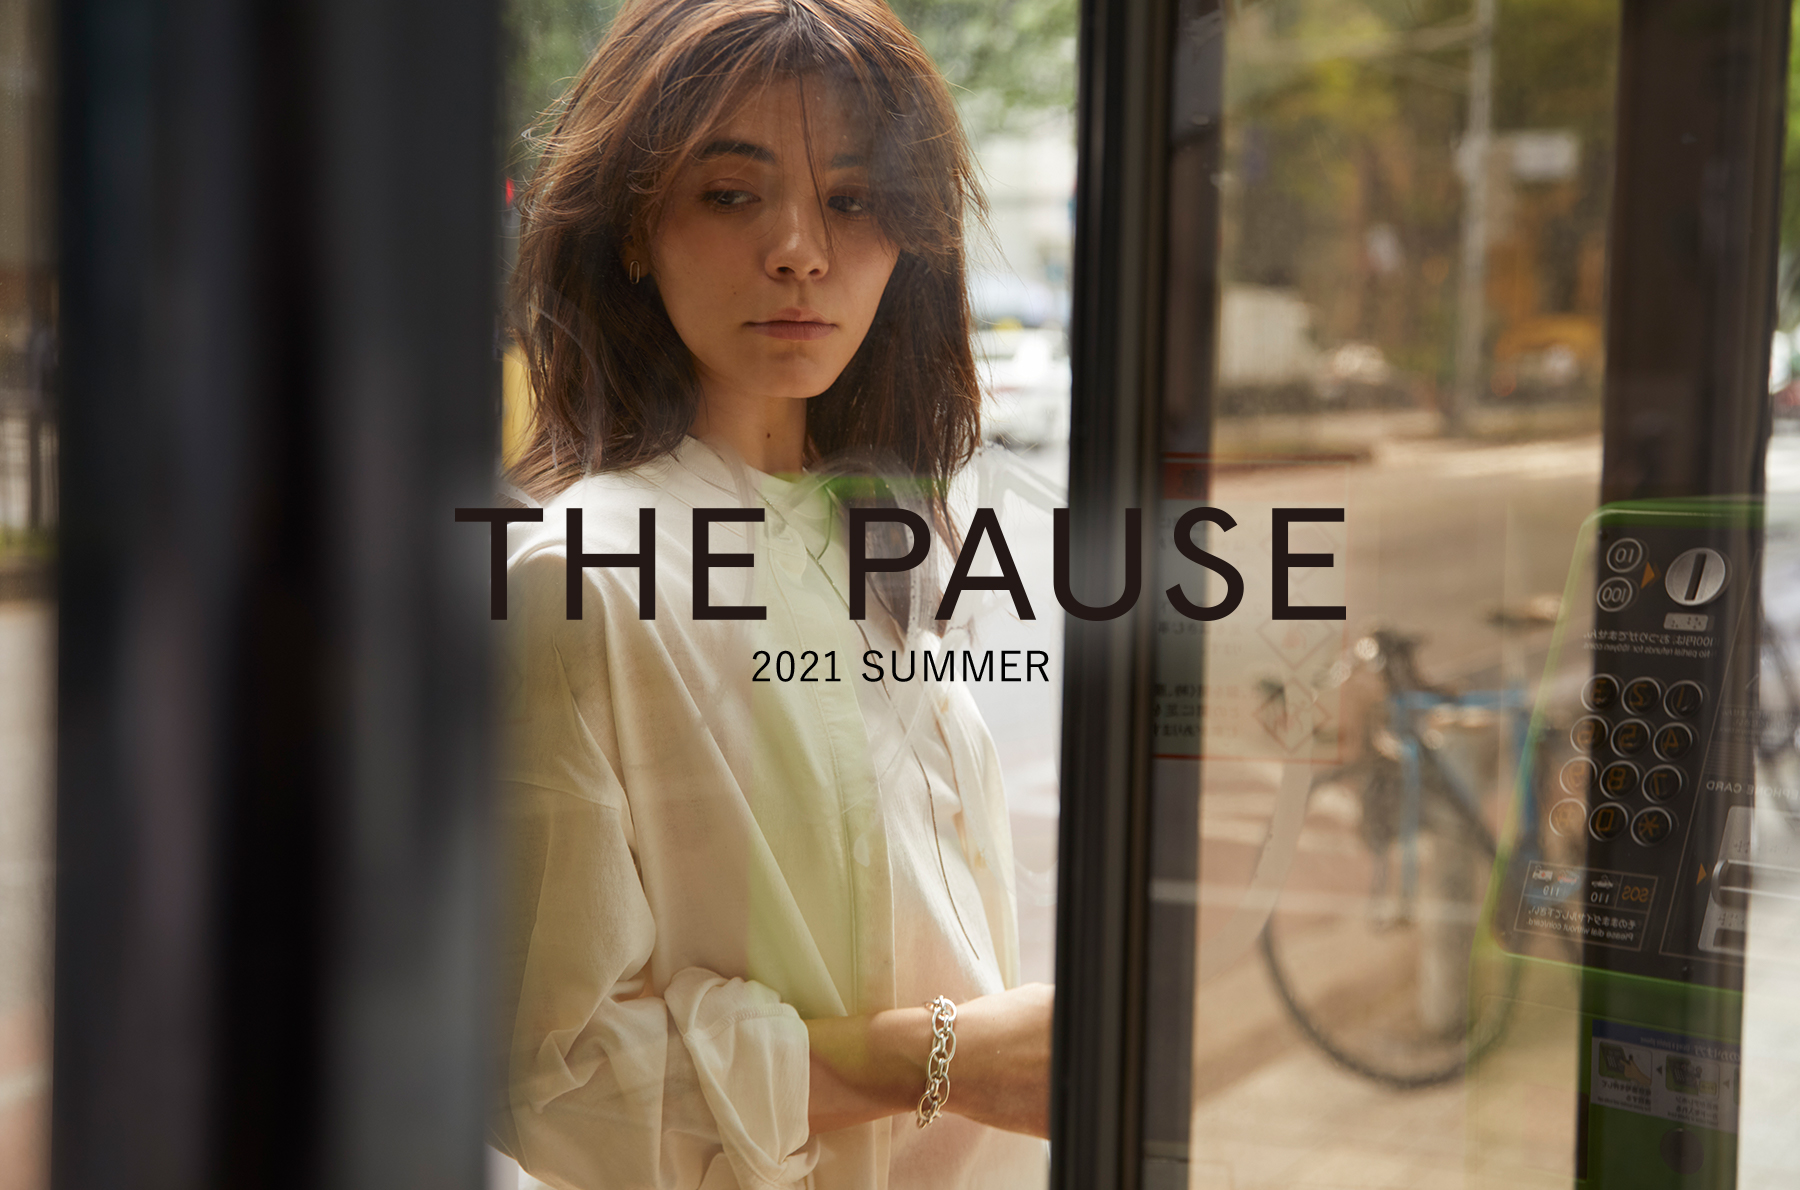 【THE PAUSE】2021 SUMMER